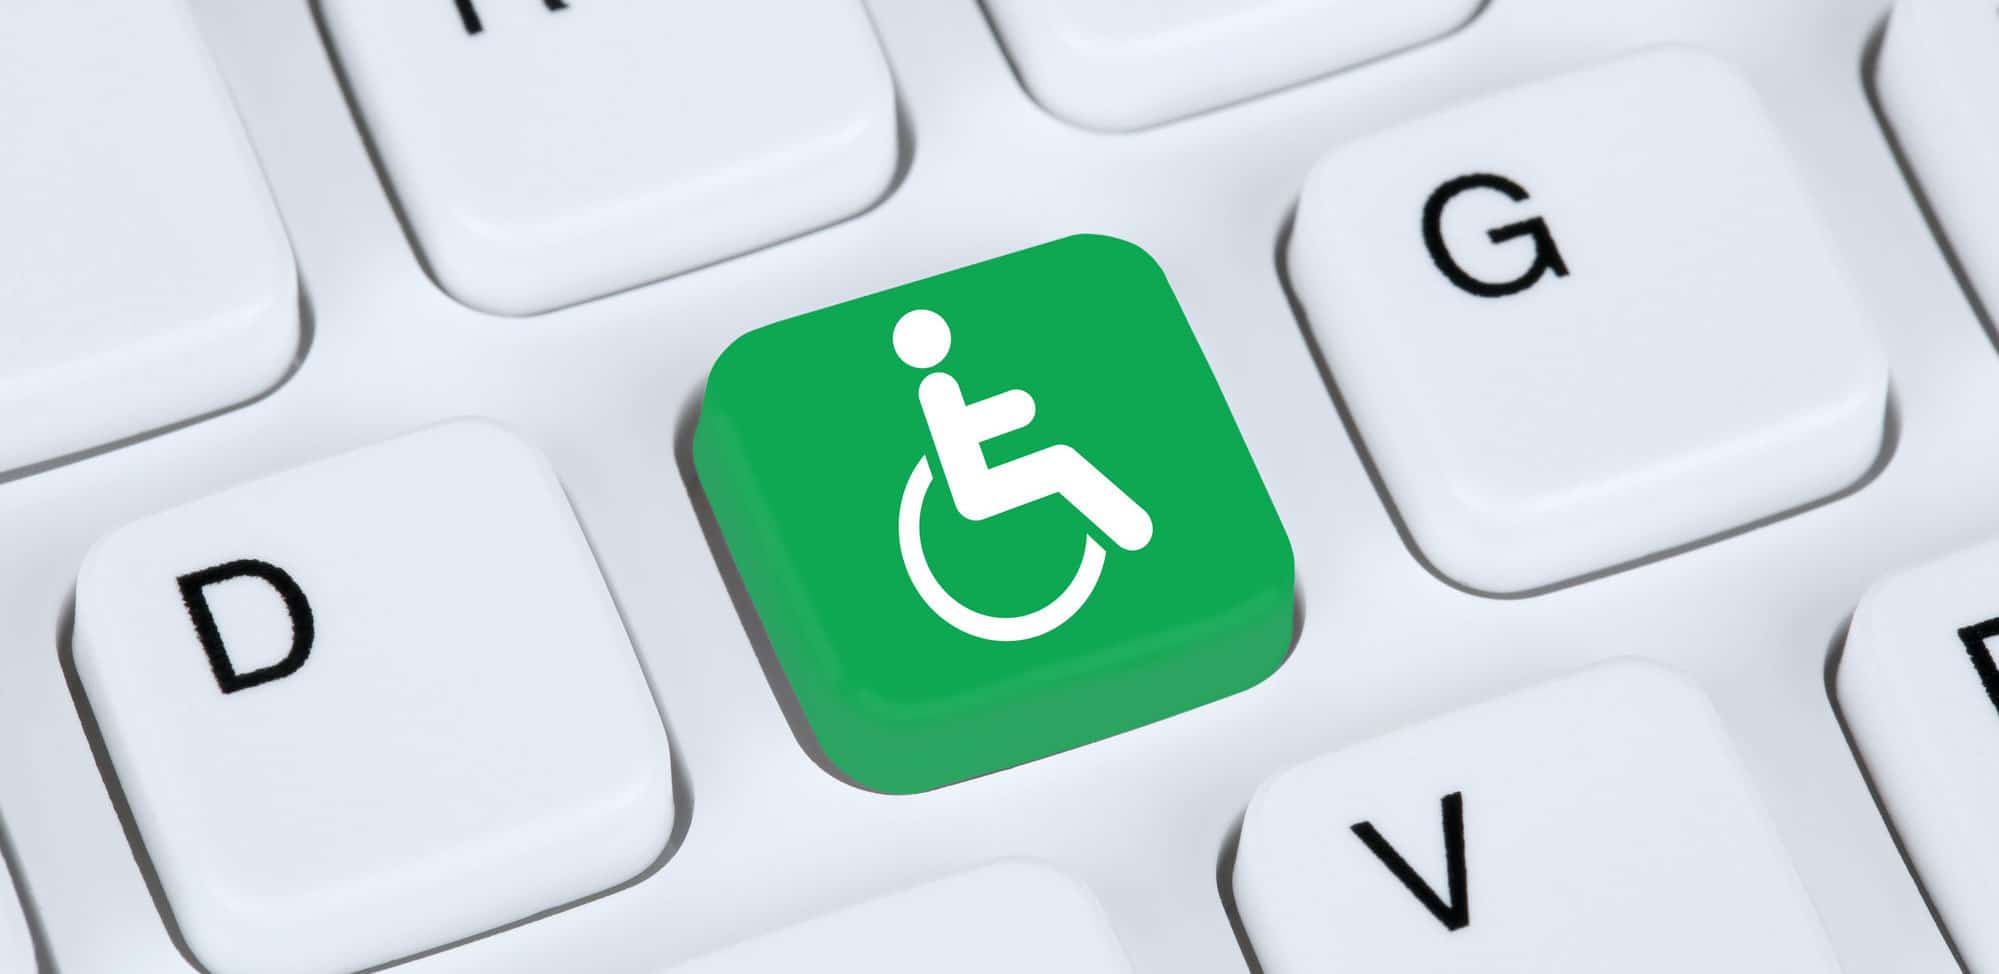 Enhancing Your Business’ Website to Make It More Accessible for People with Disabilities